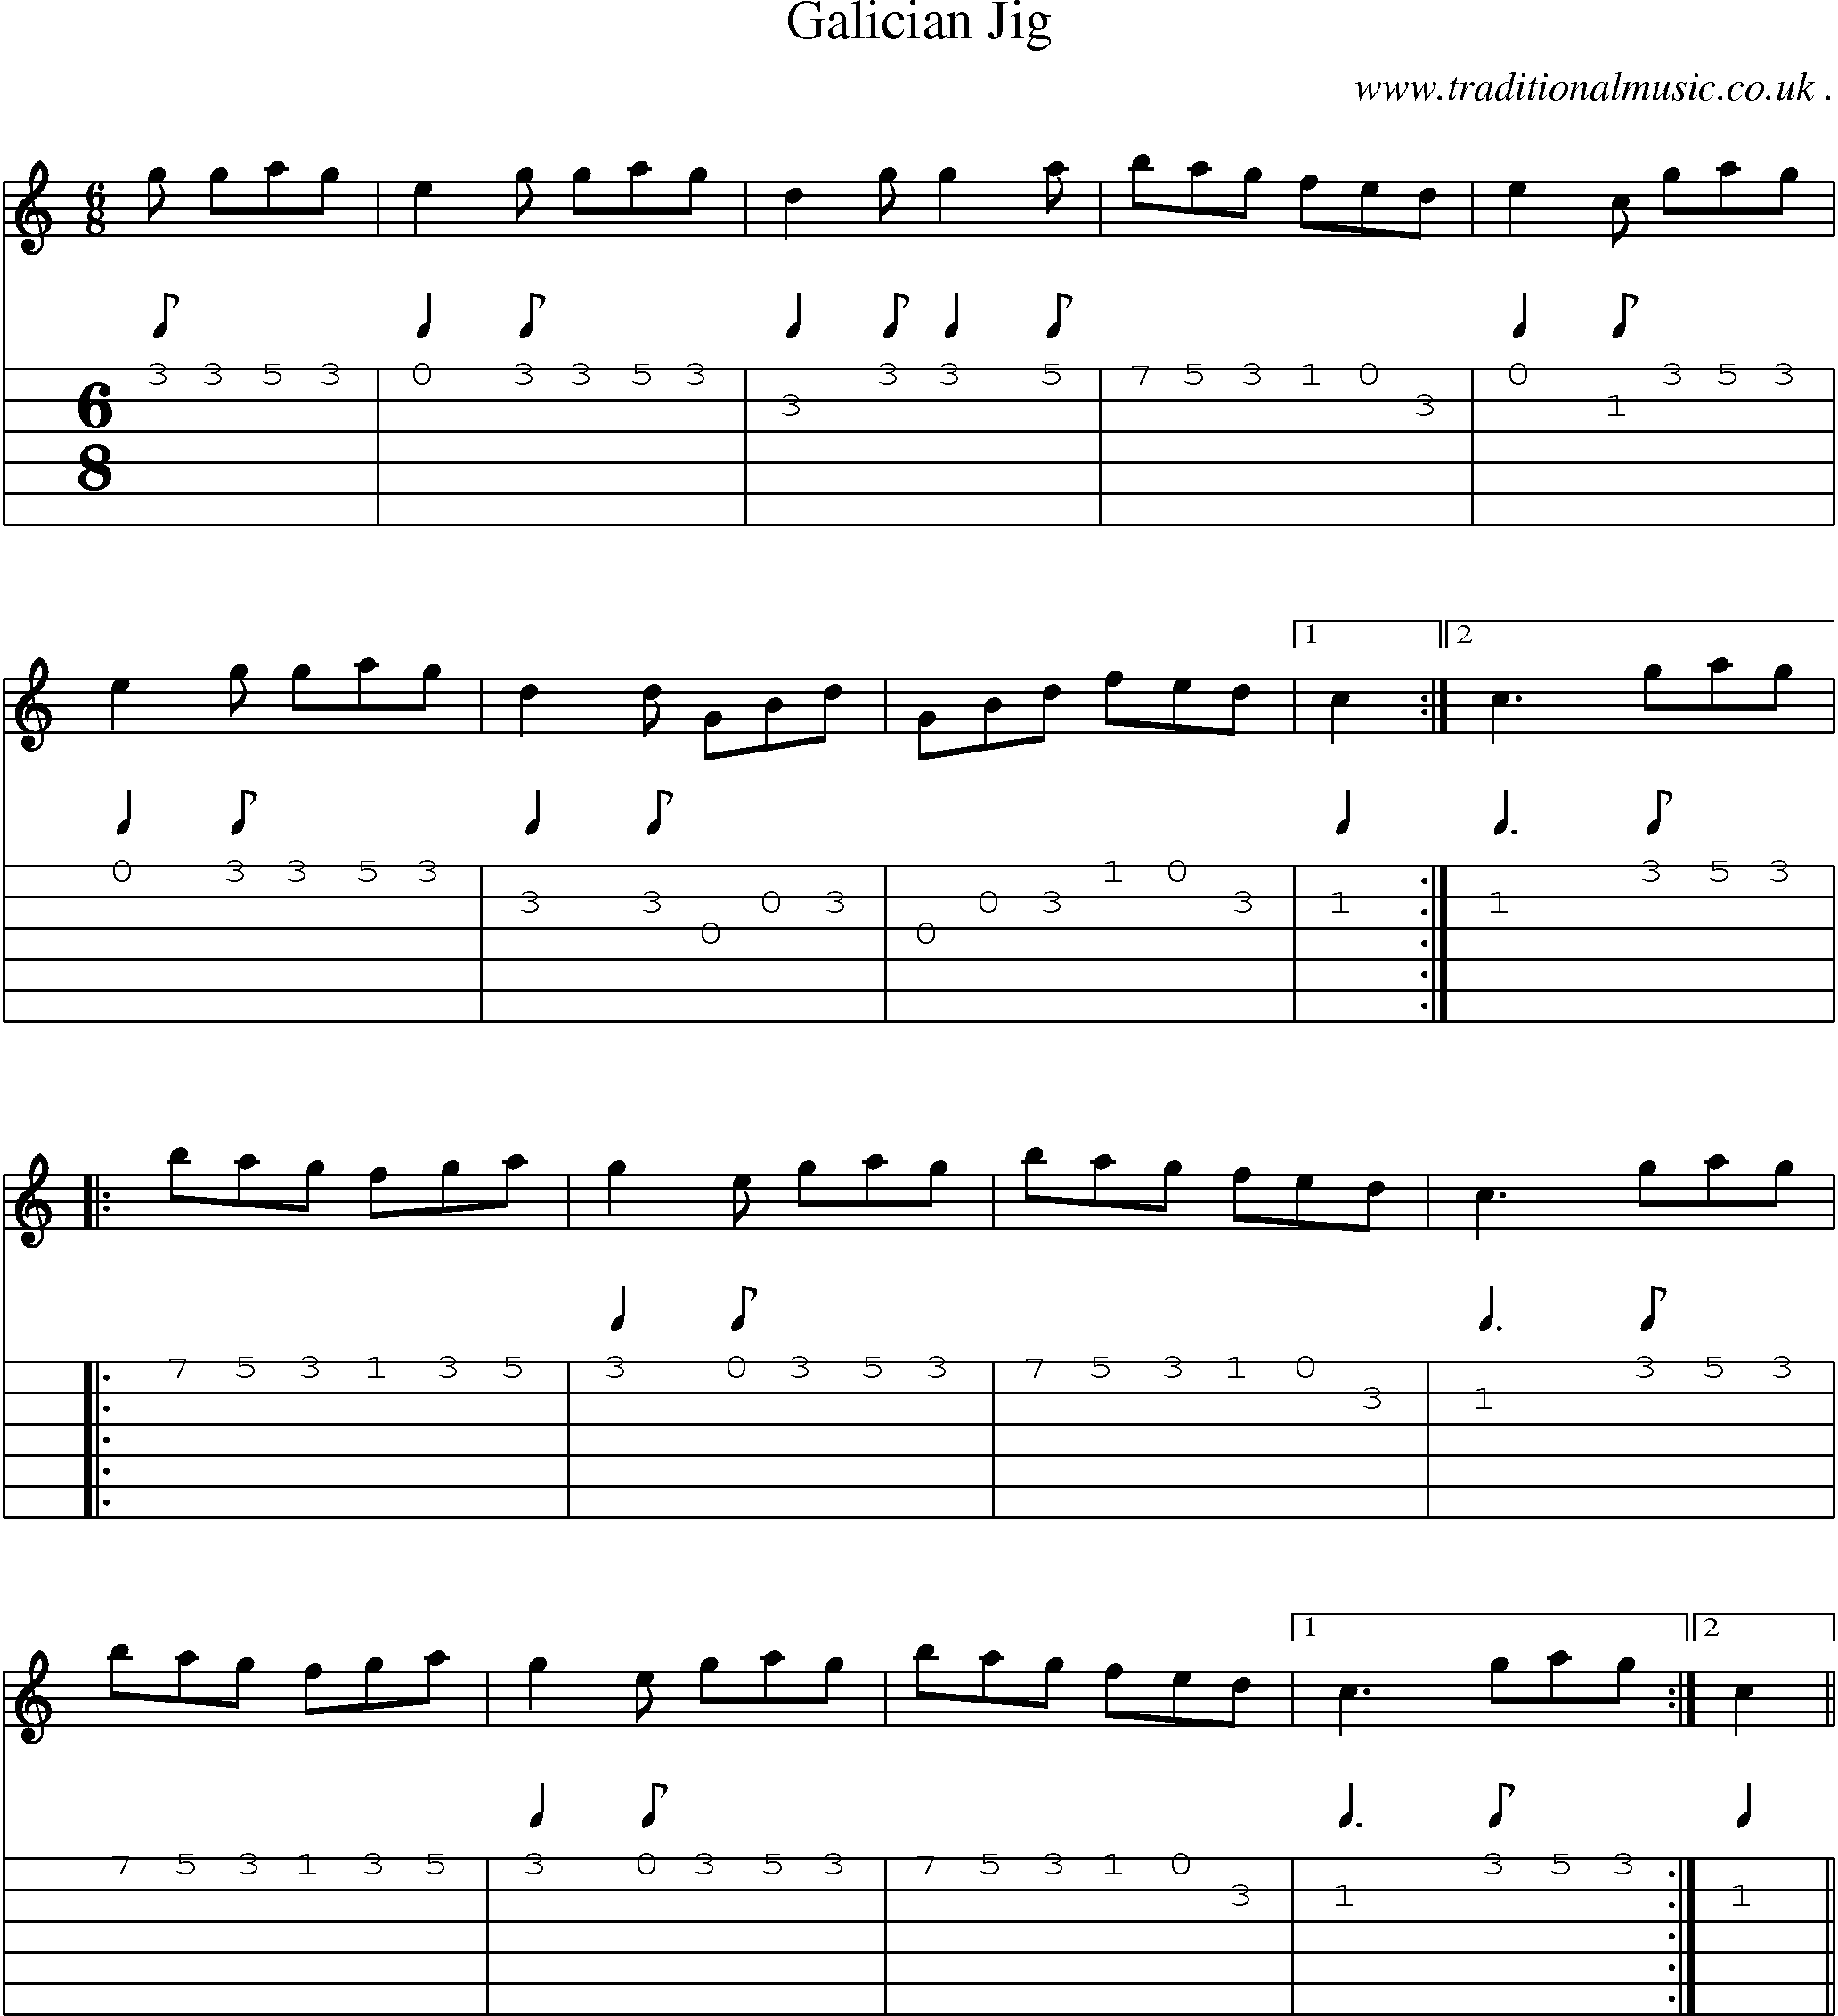 Sheet-Music and Guitar Tabs for Galician Jig